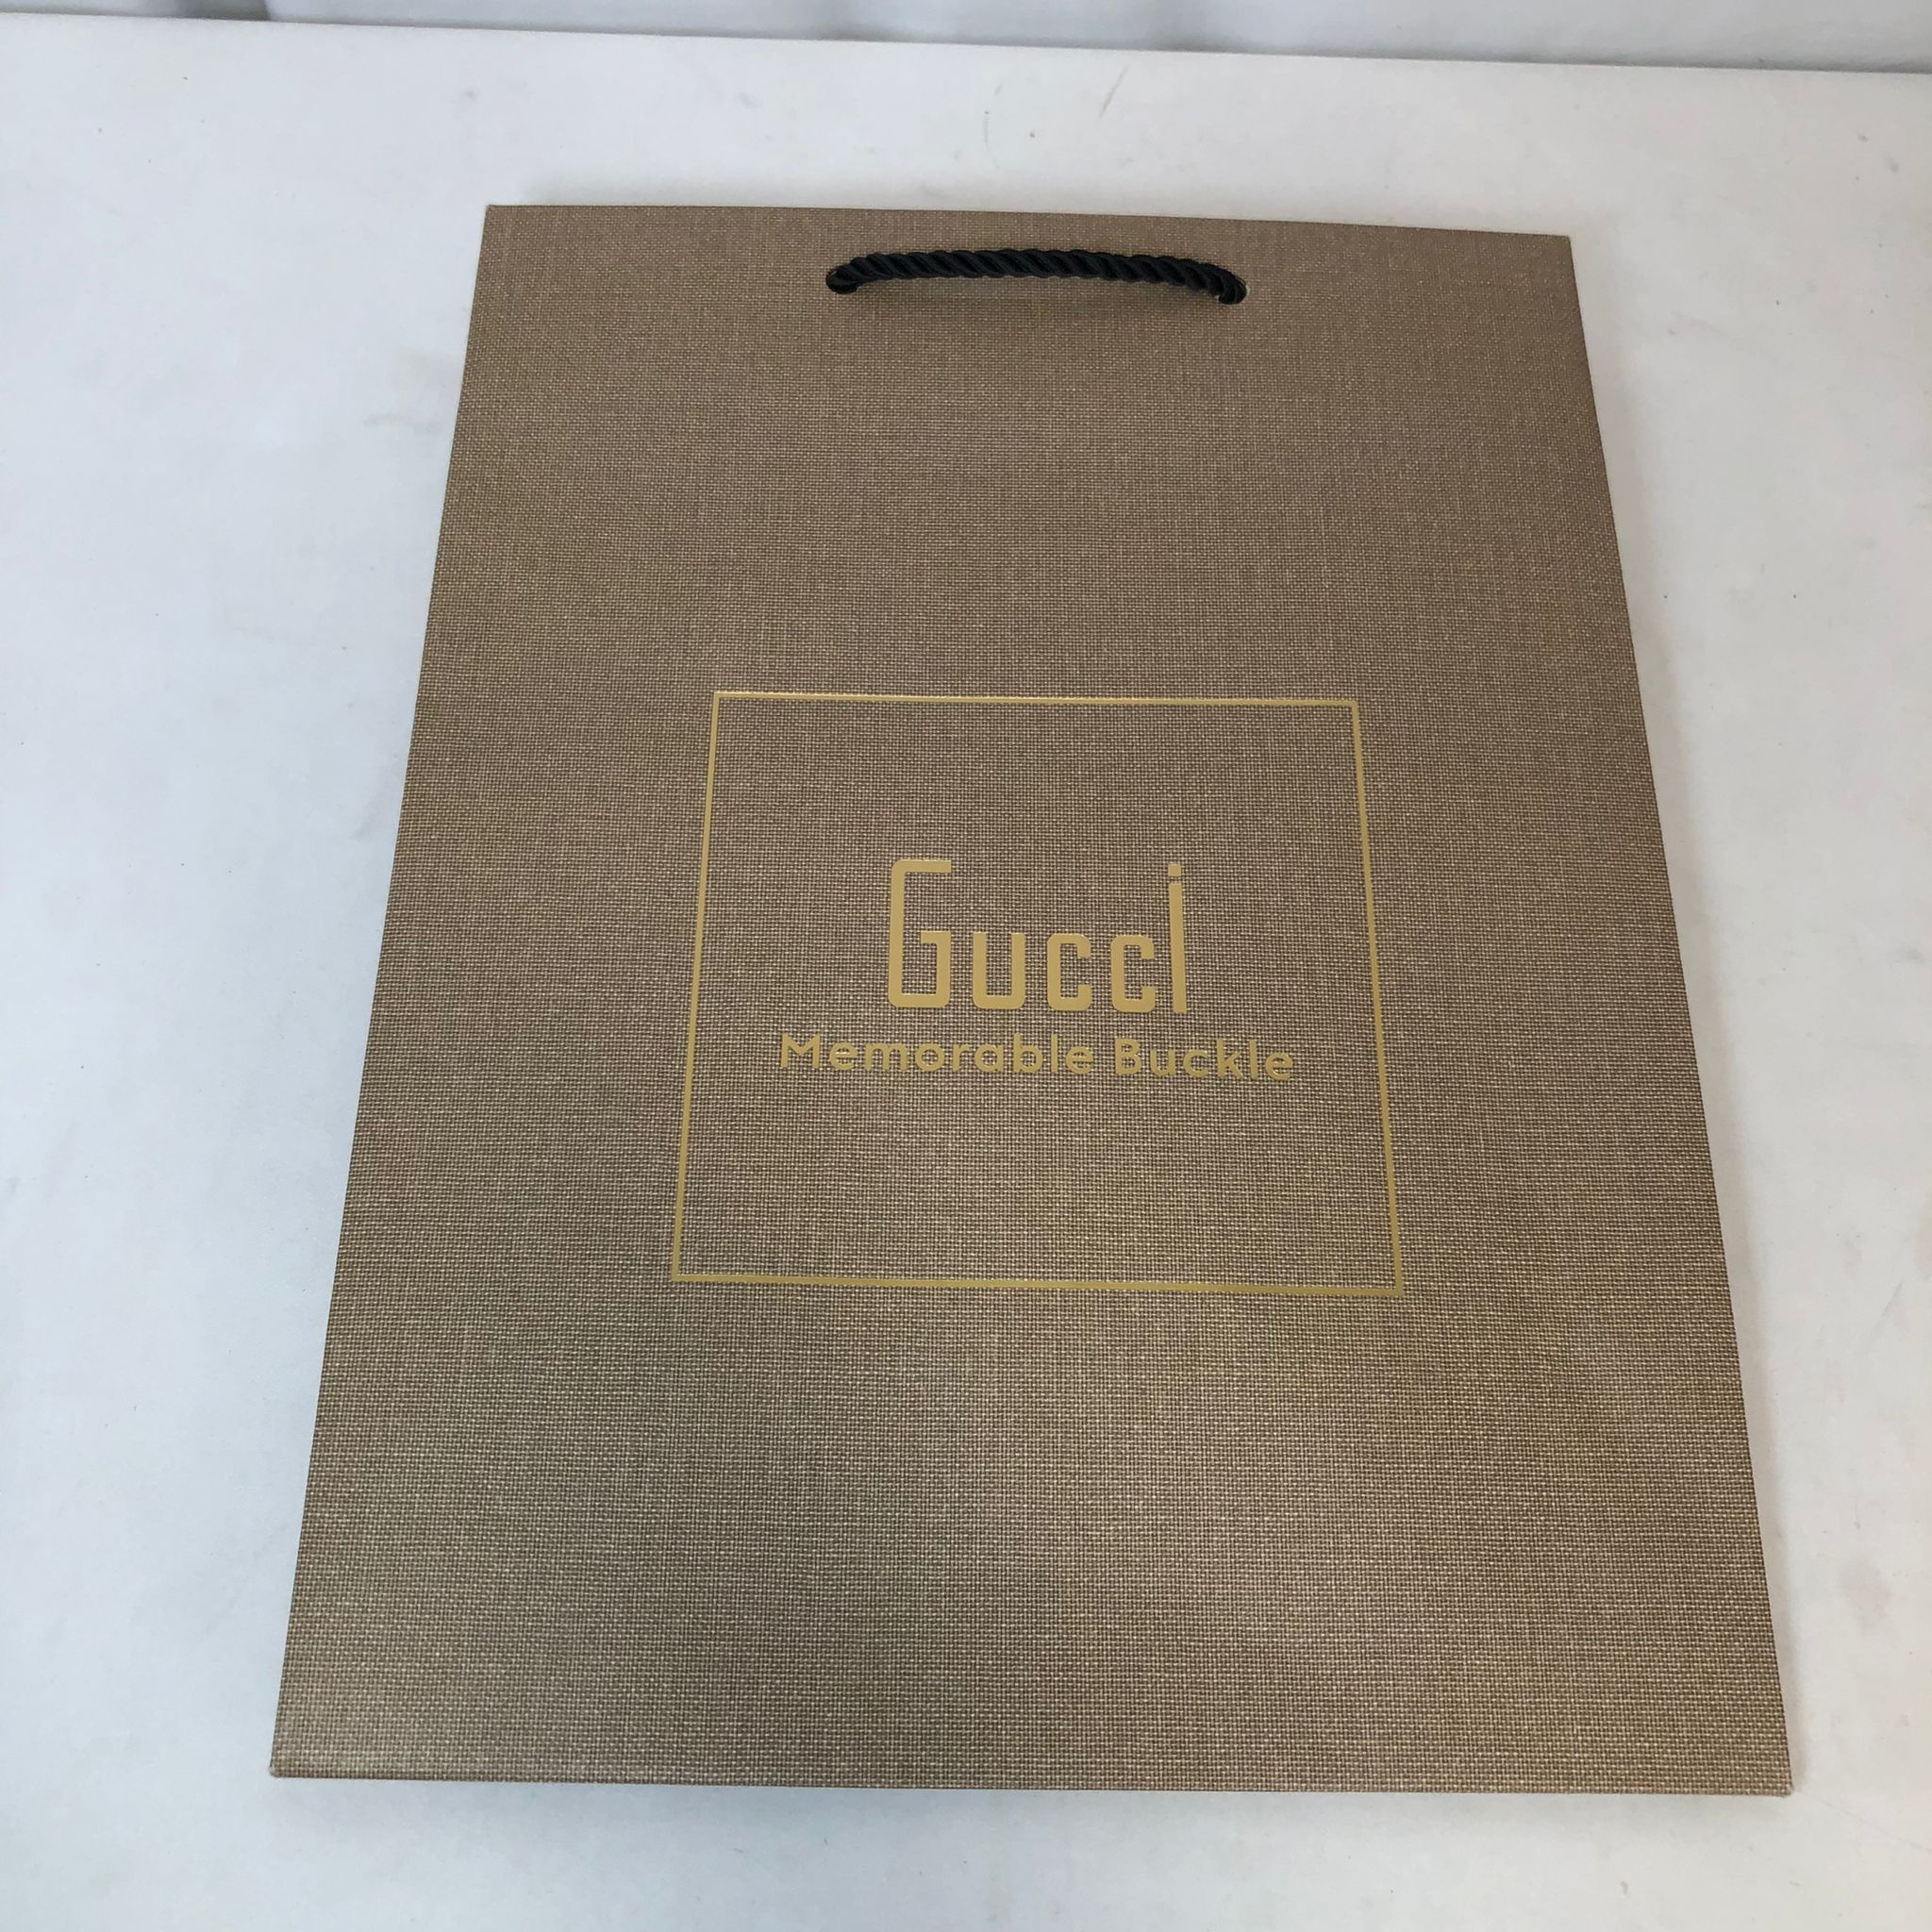 Gucci Gift Bags (sold in sets)